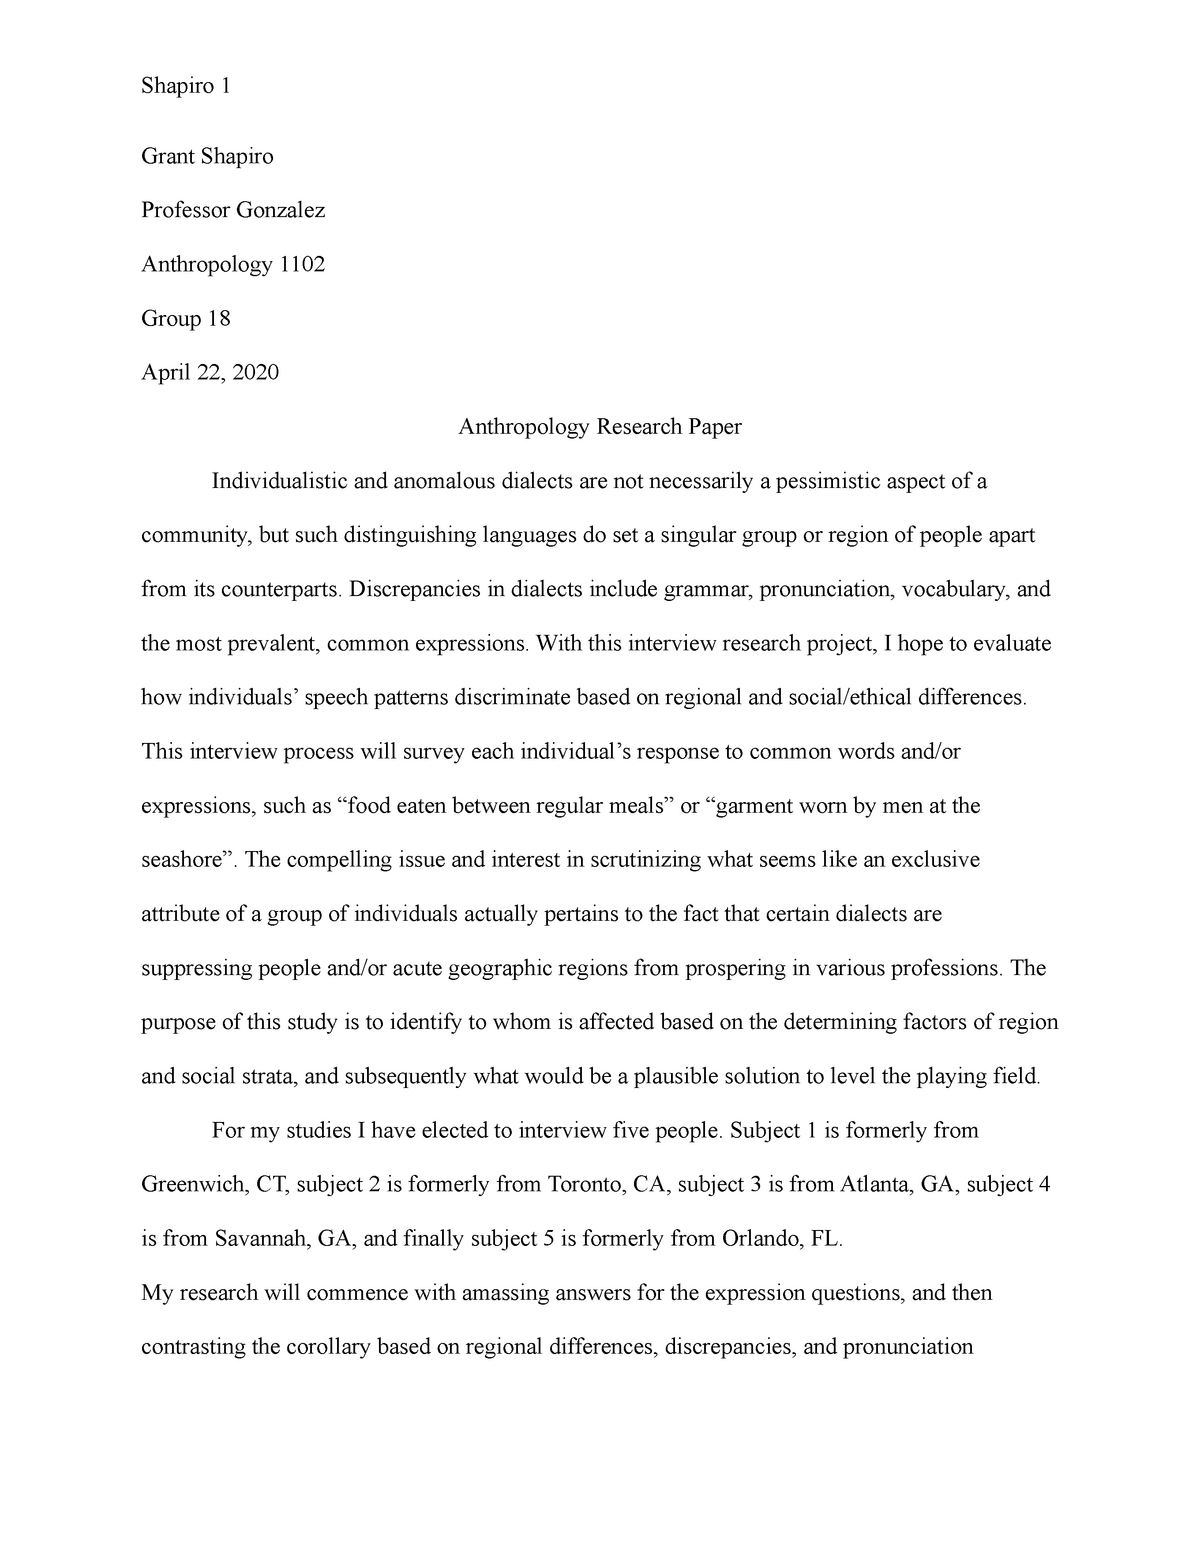 research papers anthropology sociology